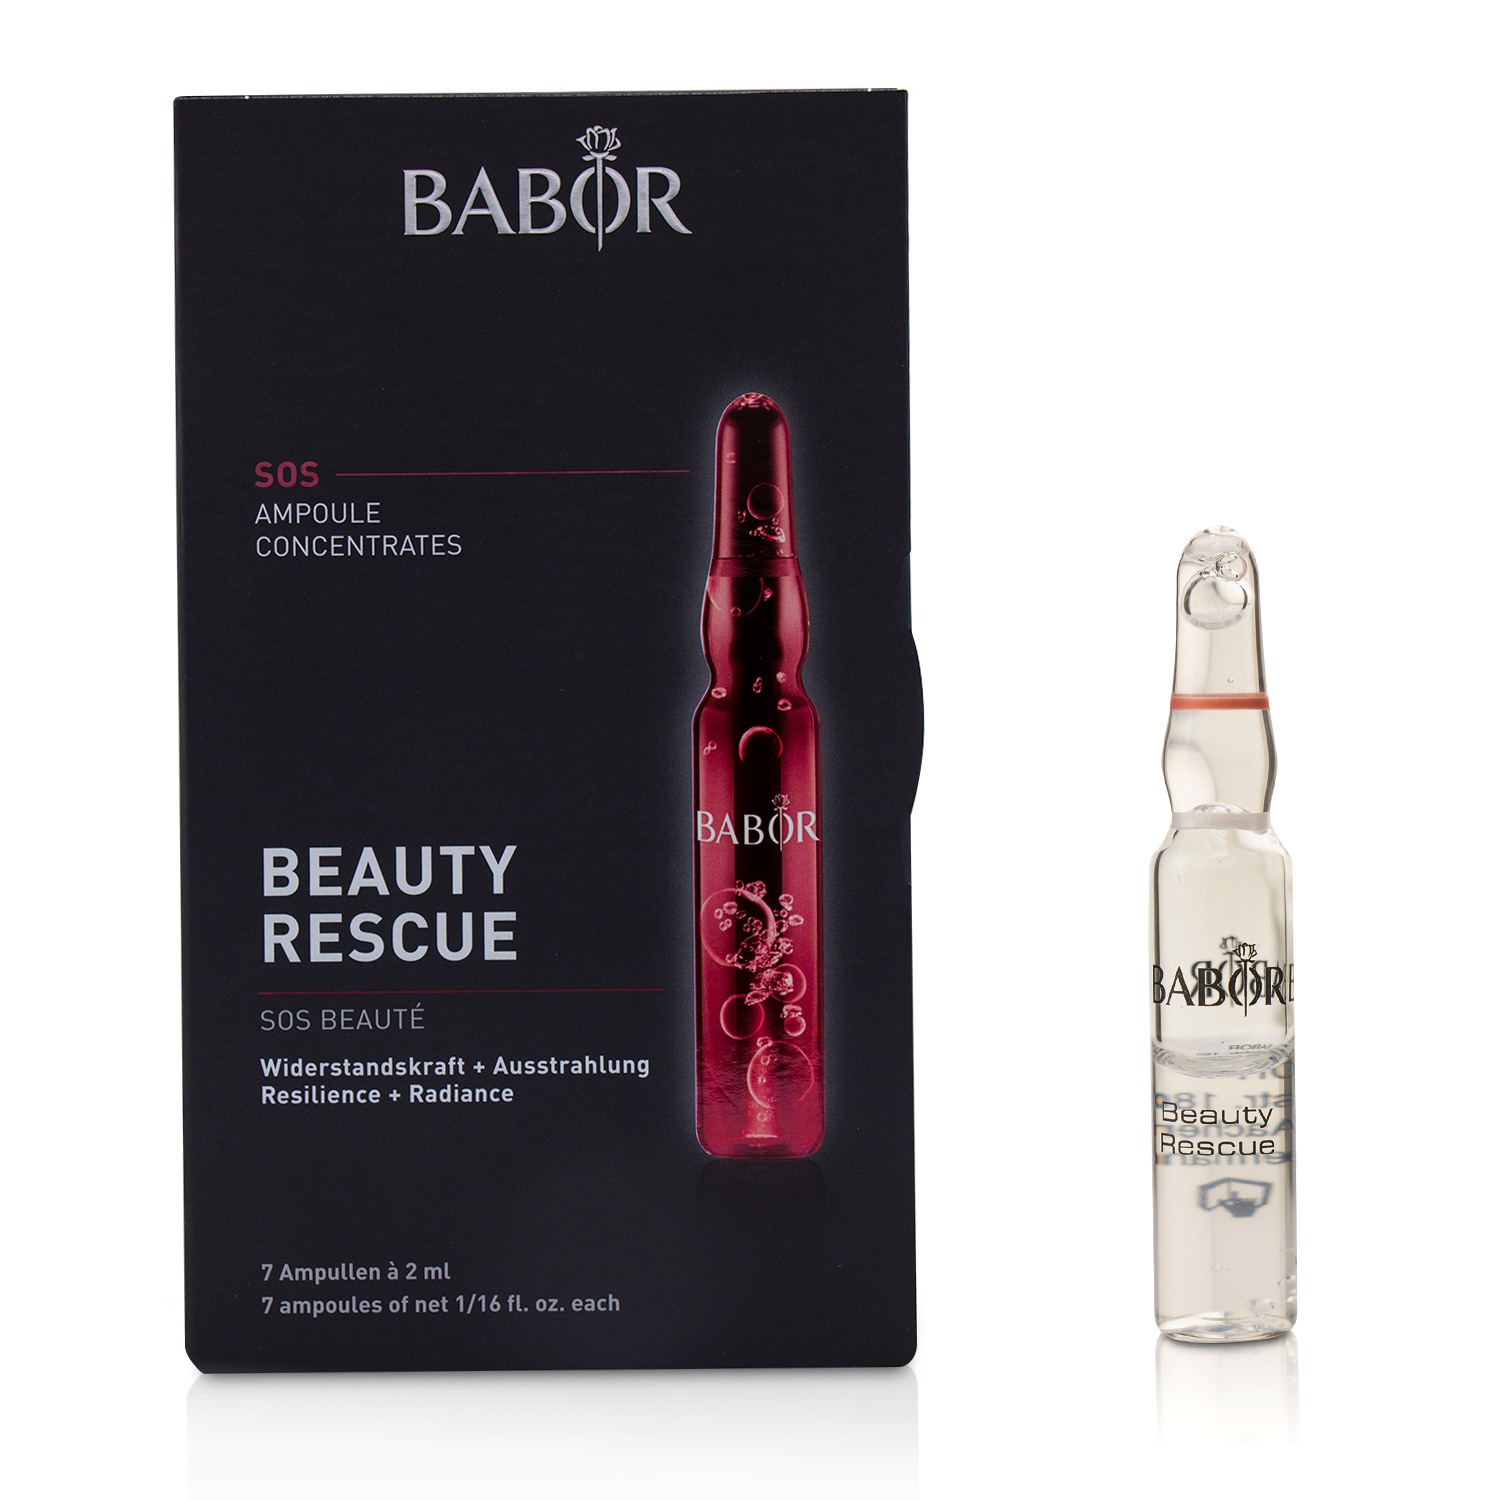 Ampoule Concentrates SOS Beauty Rescue (Resilience + Radiance) Babor Image